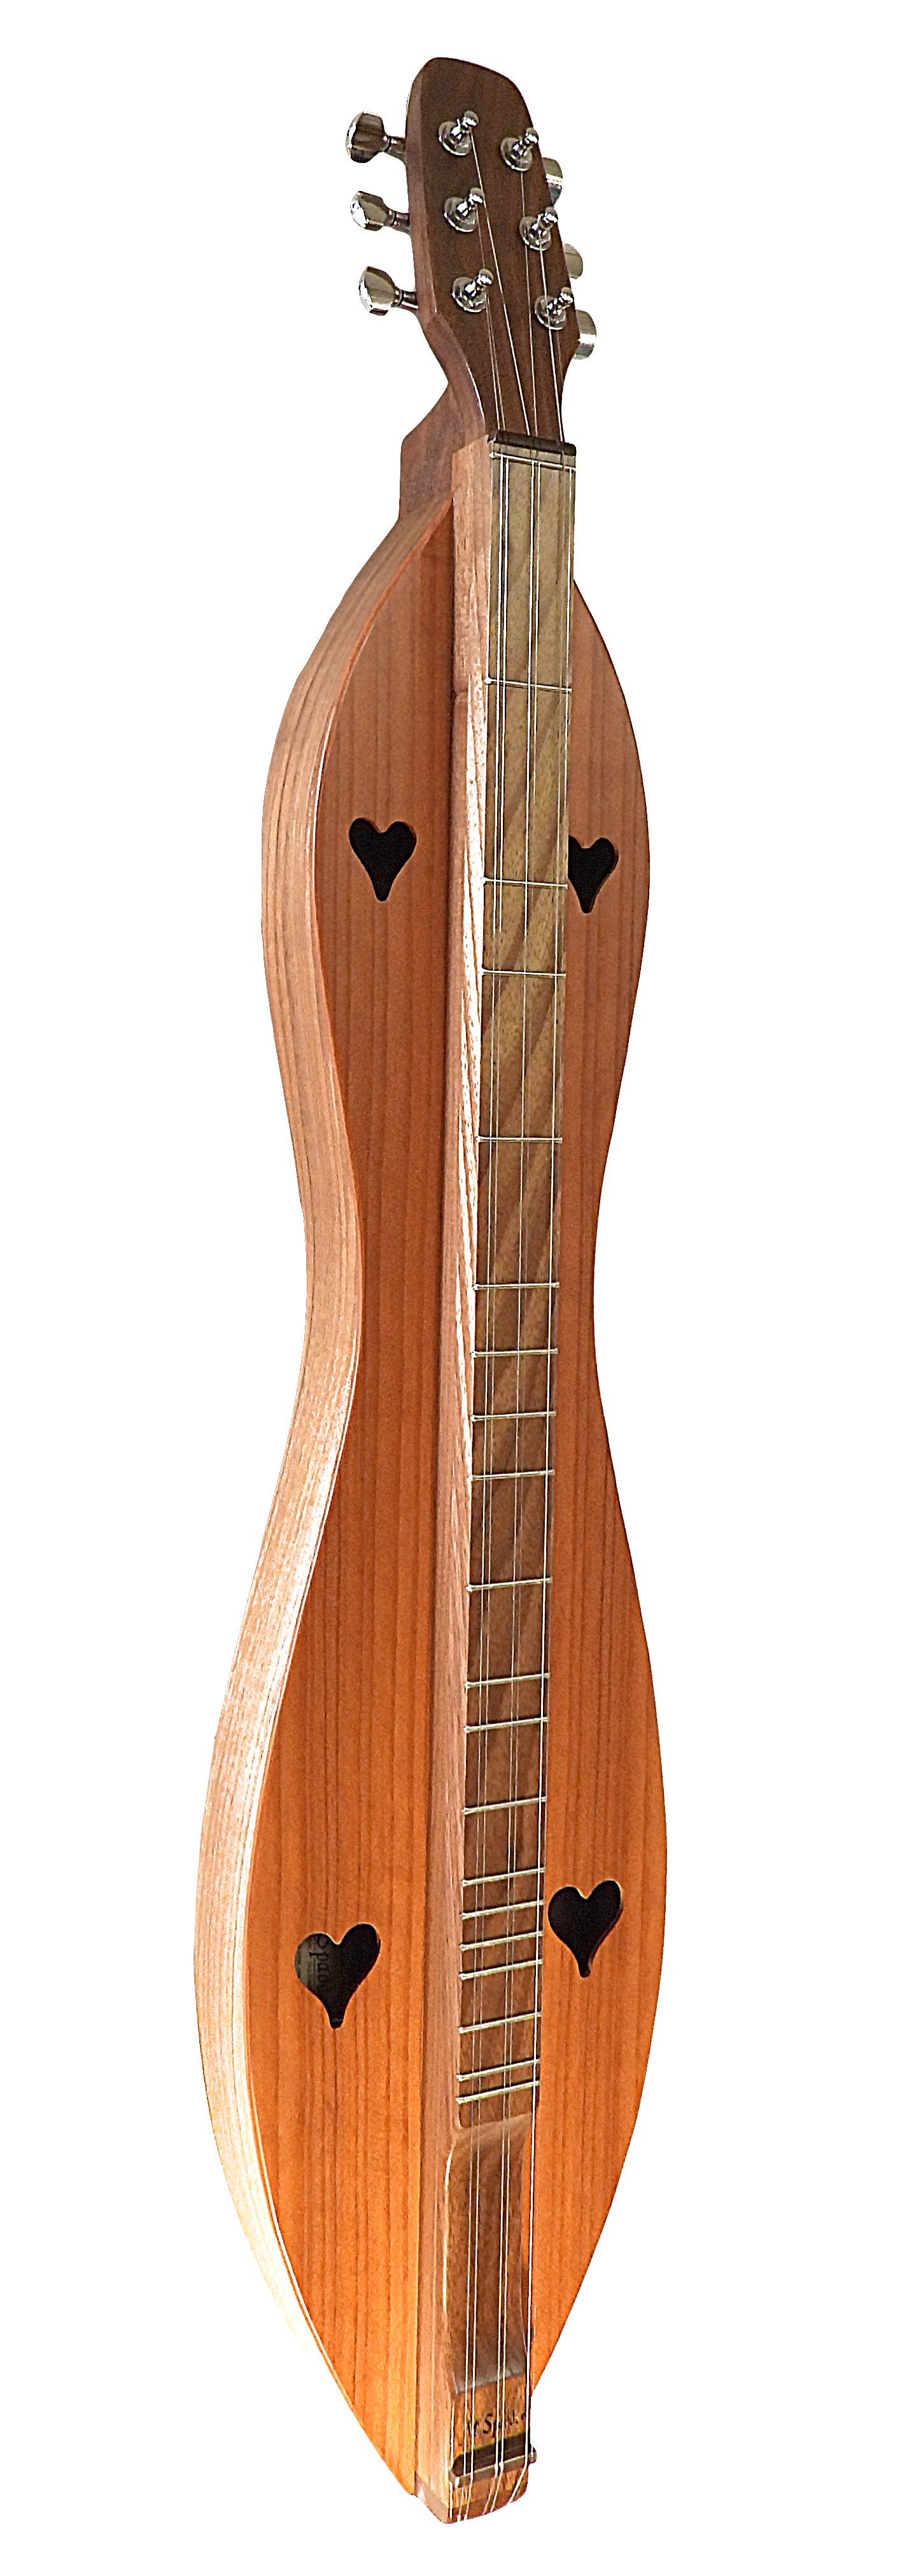 6 String, Flathead, Hourglass with Walnut back and sides, Redwood top (6FHWR)